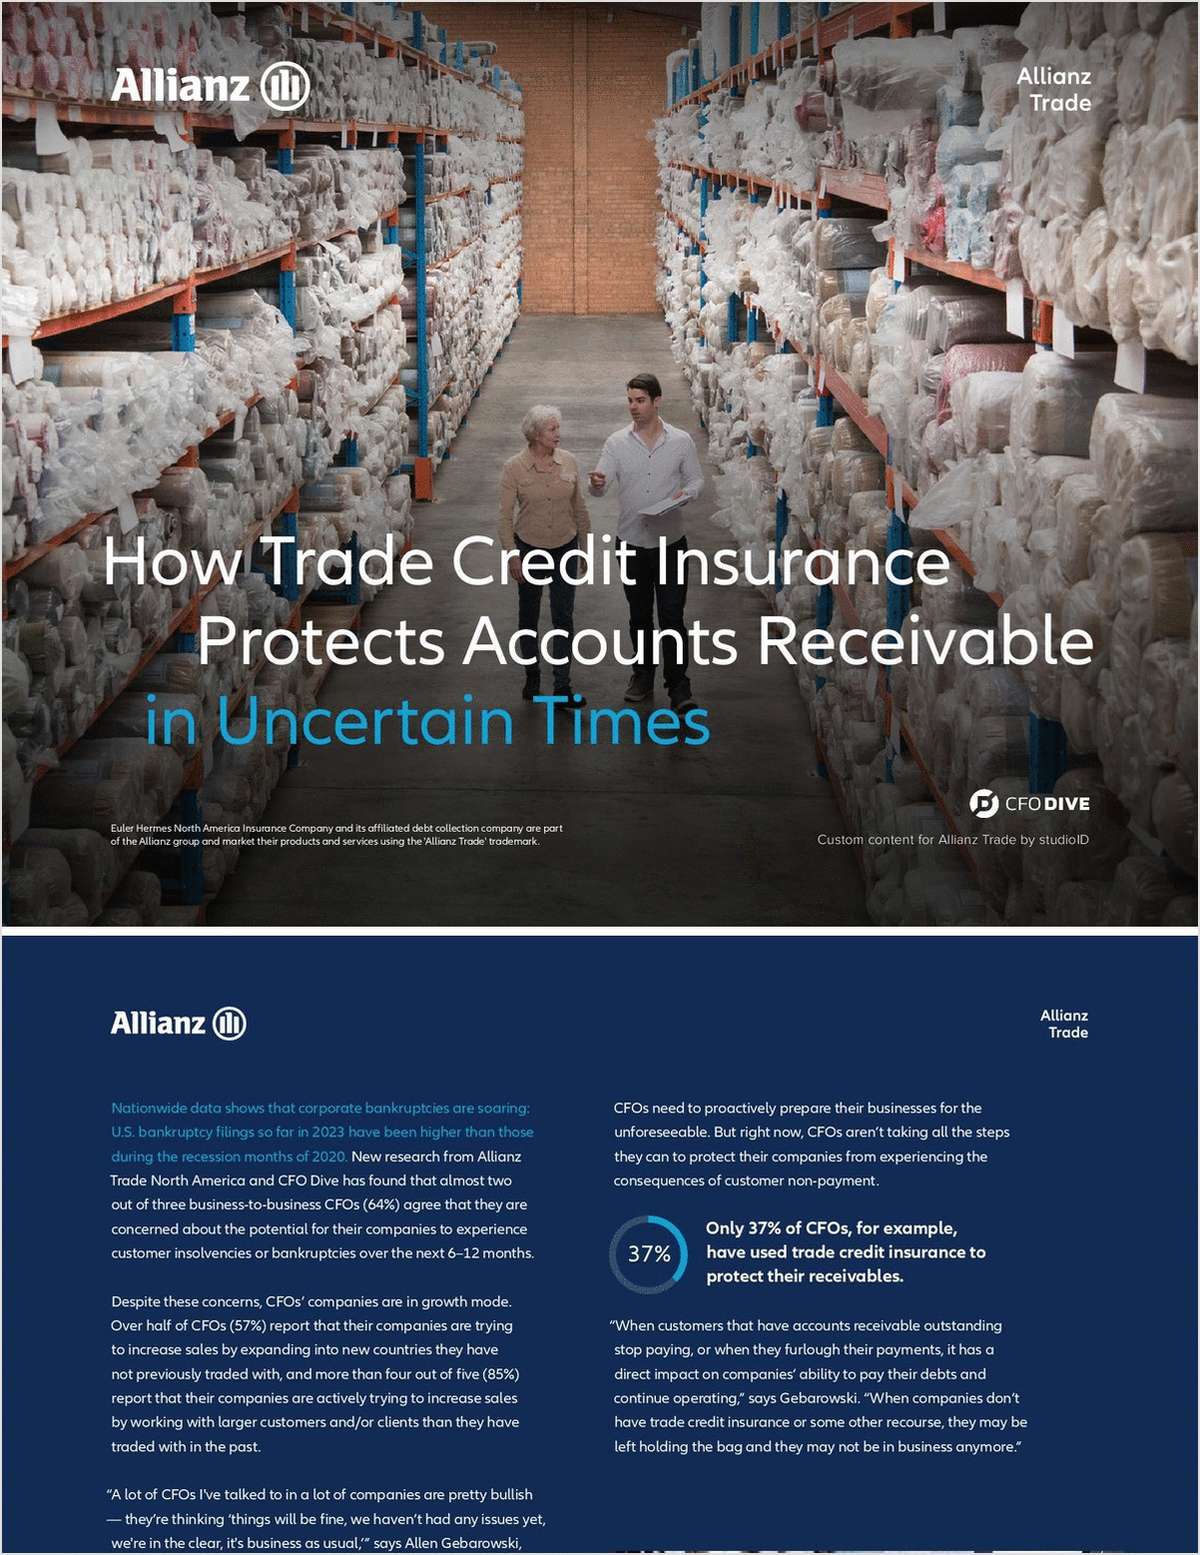 How Businesses Can Stay Competitive With Trade Credit Insurance